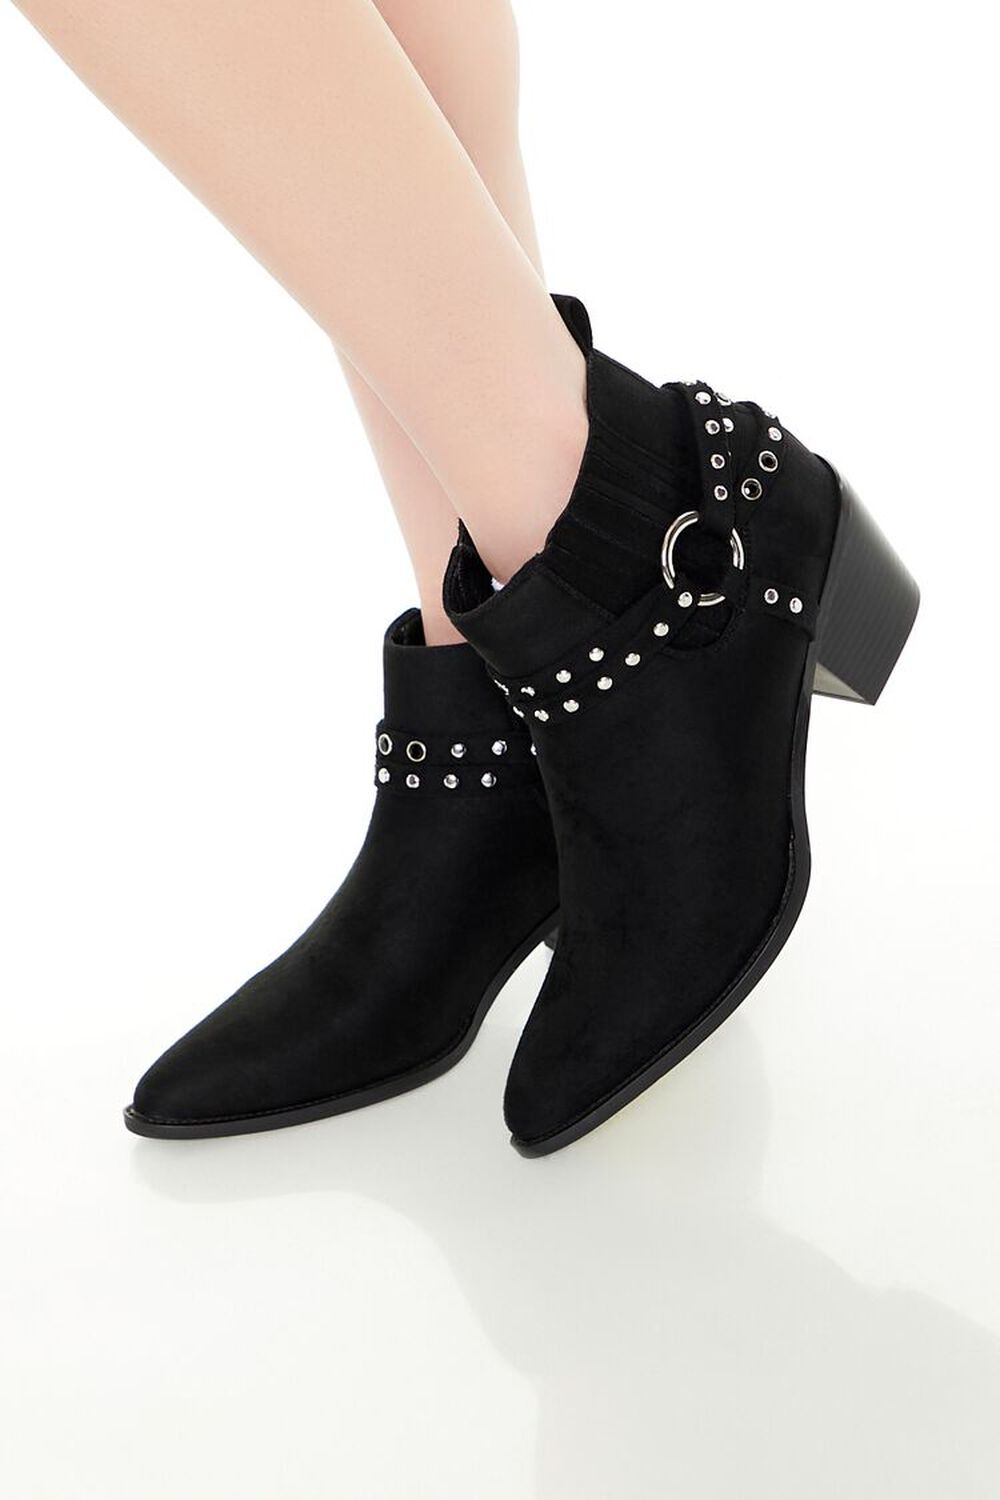 BLACK Studded Faux Suede Booties, image 1